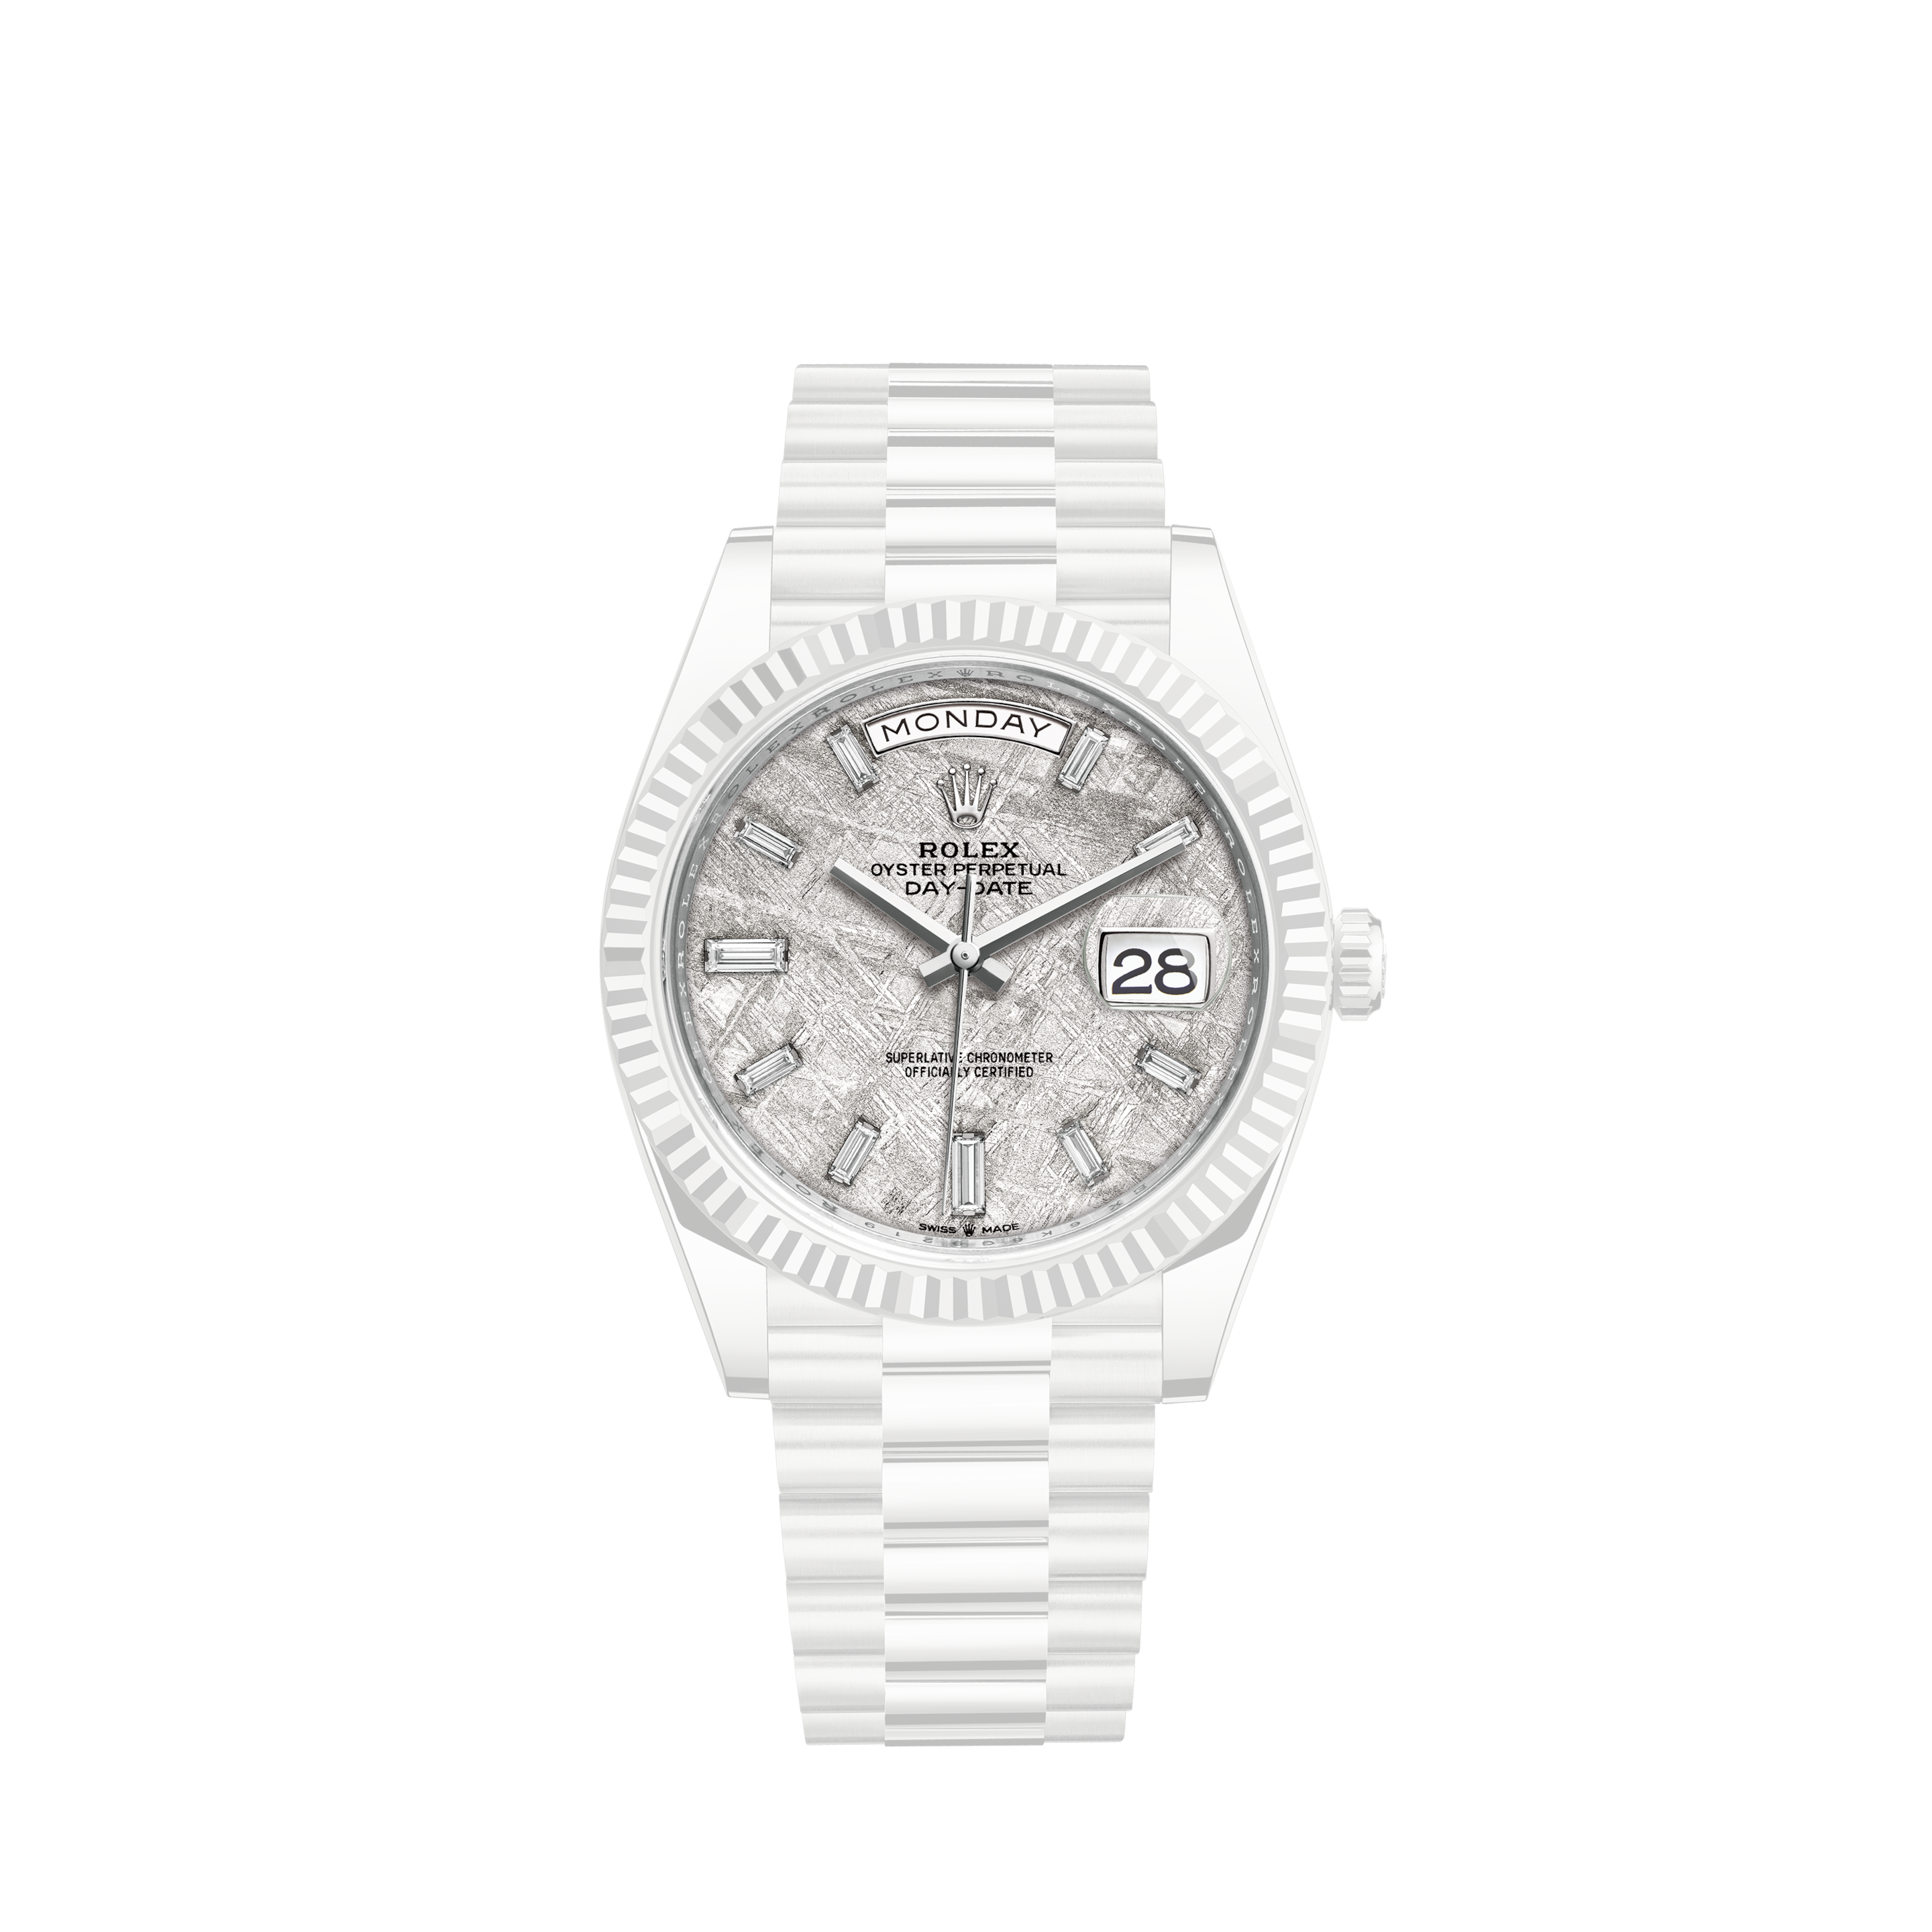 Rolex Men's Customized Rolex watch 36mm Datejust Stainless Steel White Color Dial with Diamond Accent RRTRolex Men's Customized Rolex watch 36mm Datejust Stainless Steel White Color Dial with Diamond Accent RT